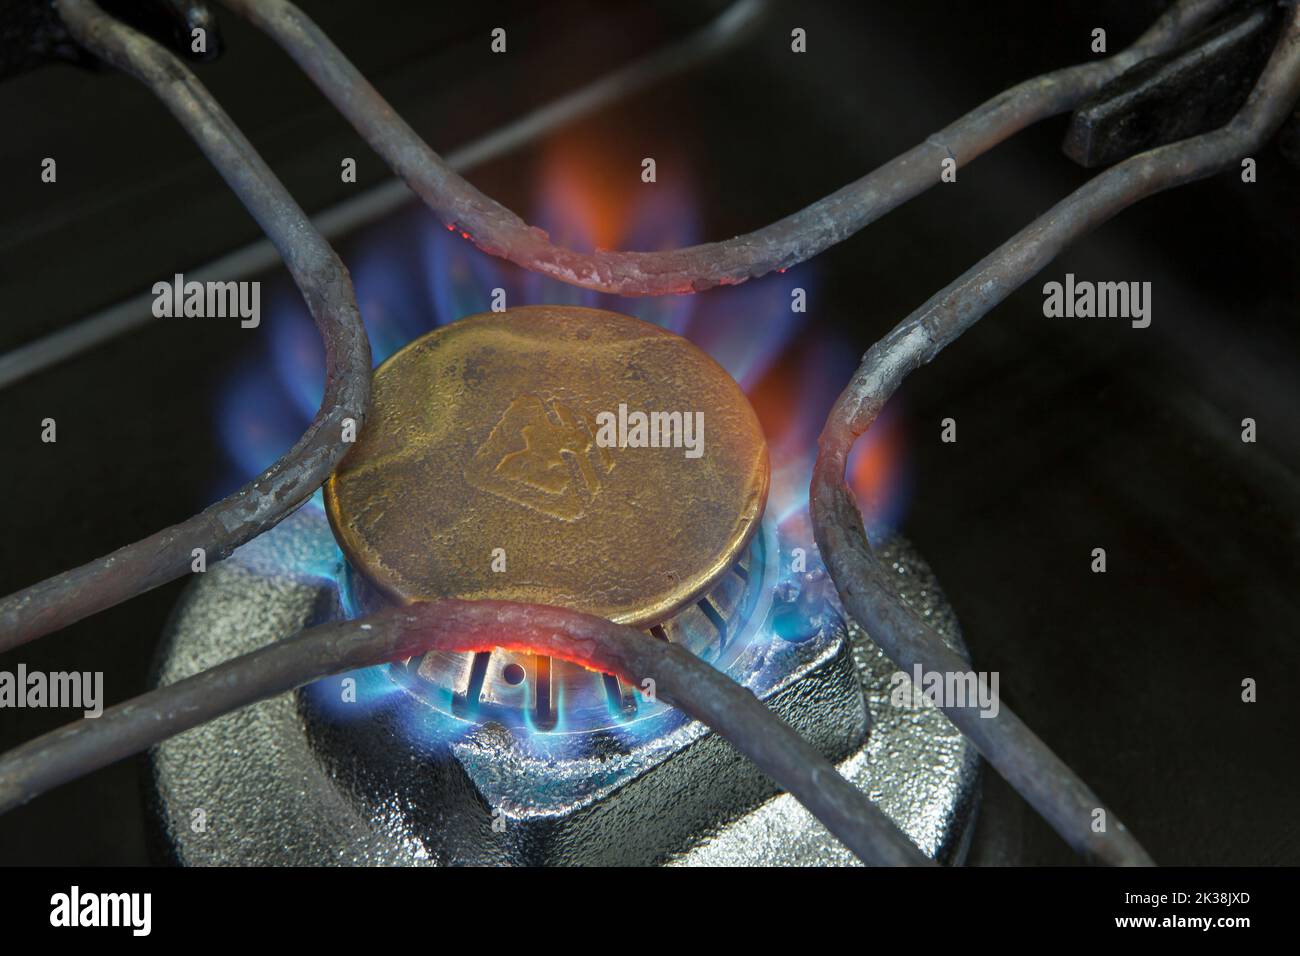 Flame on a gas cooker Stock Photo